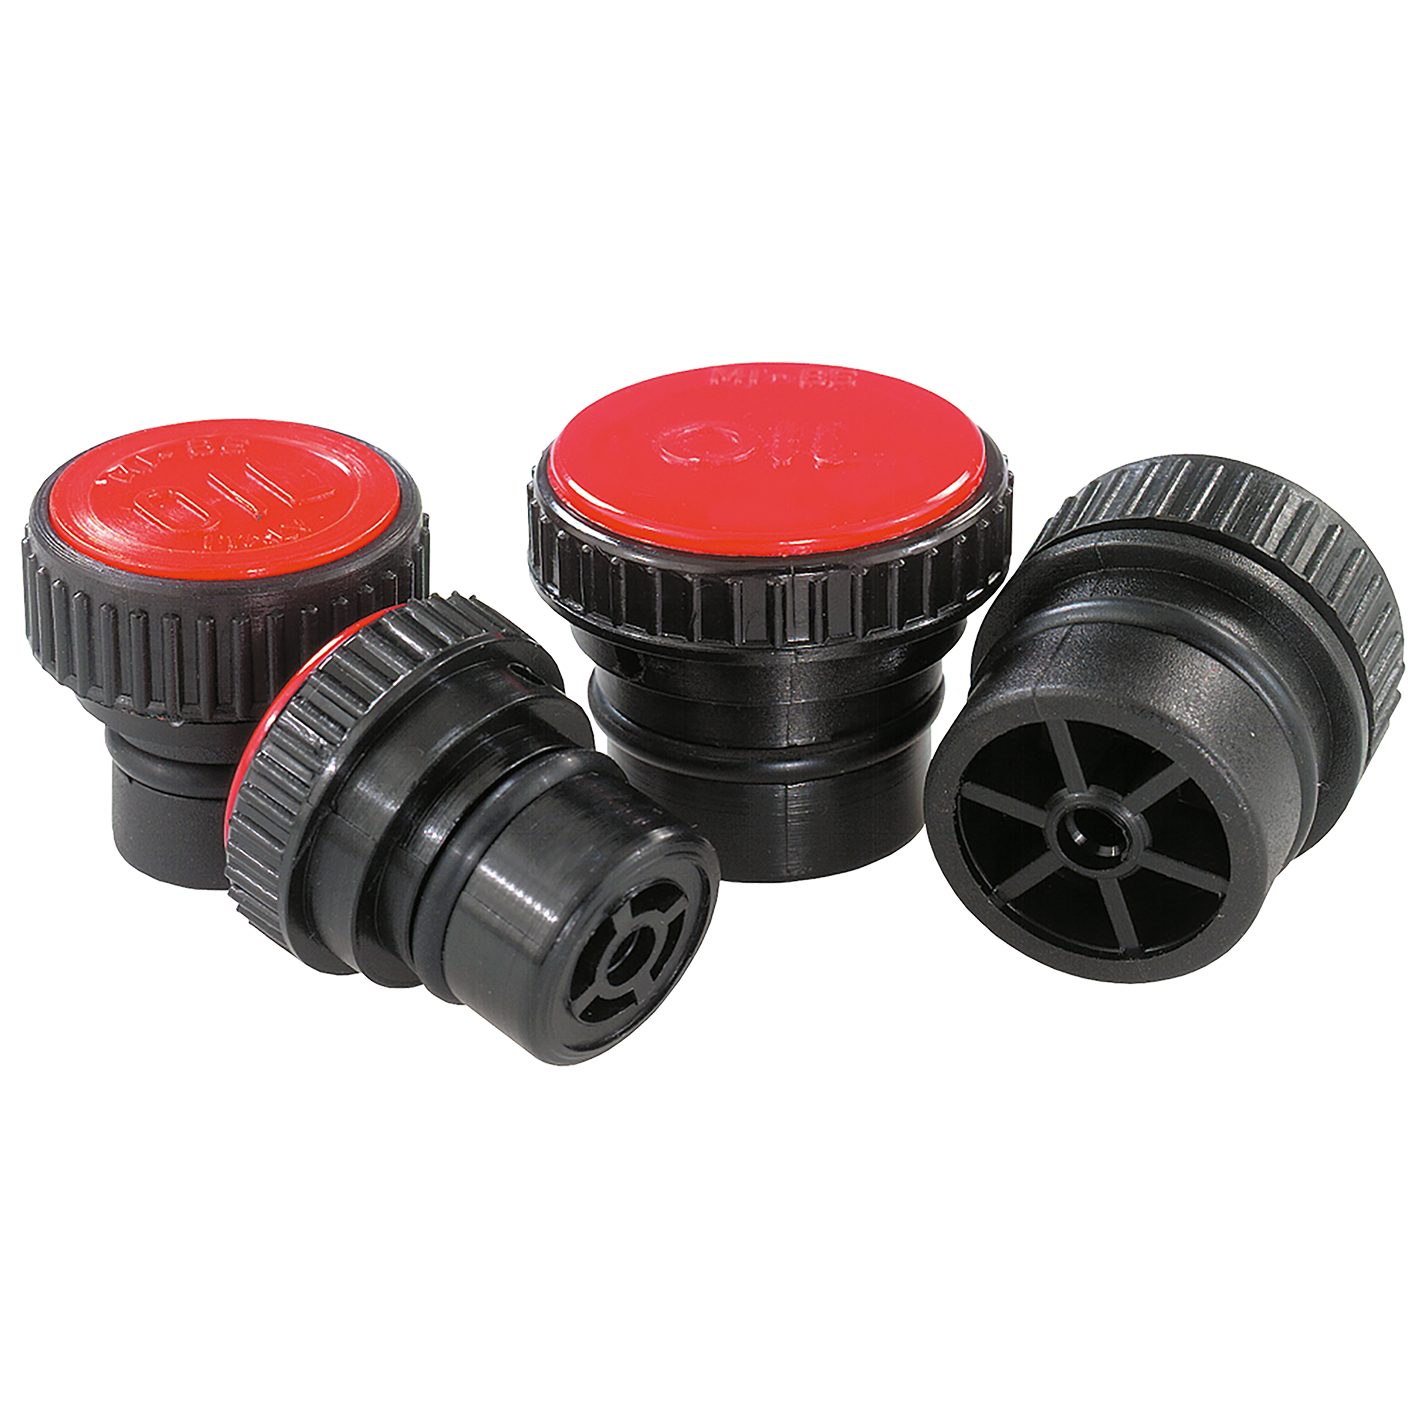 18MM PRESS-IN PLUGS WITH VENT